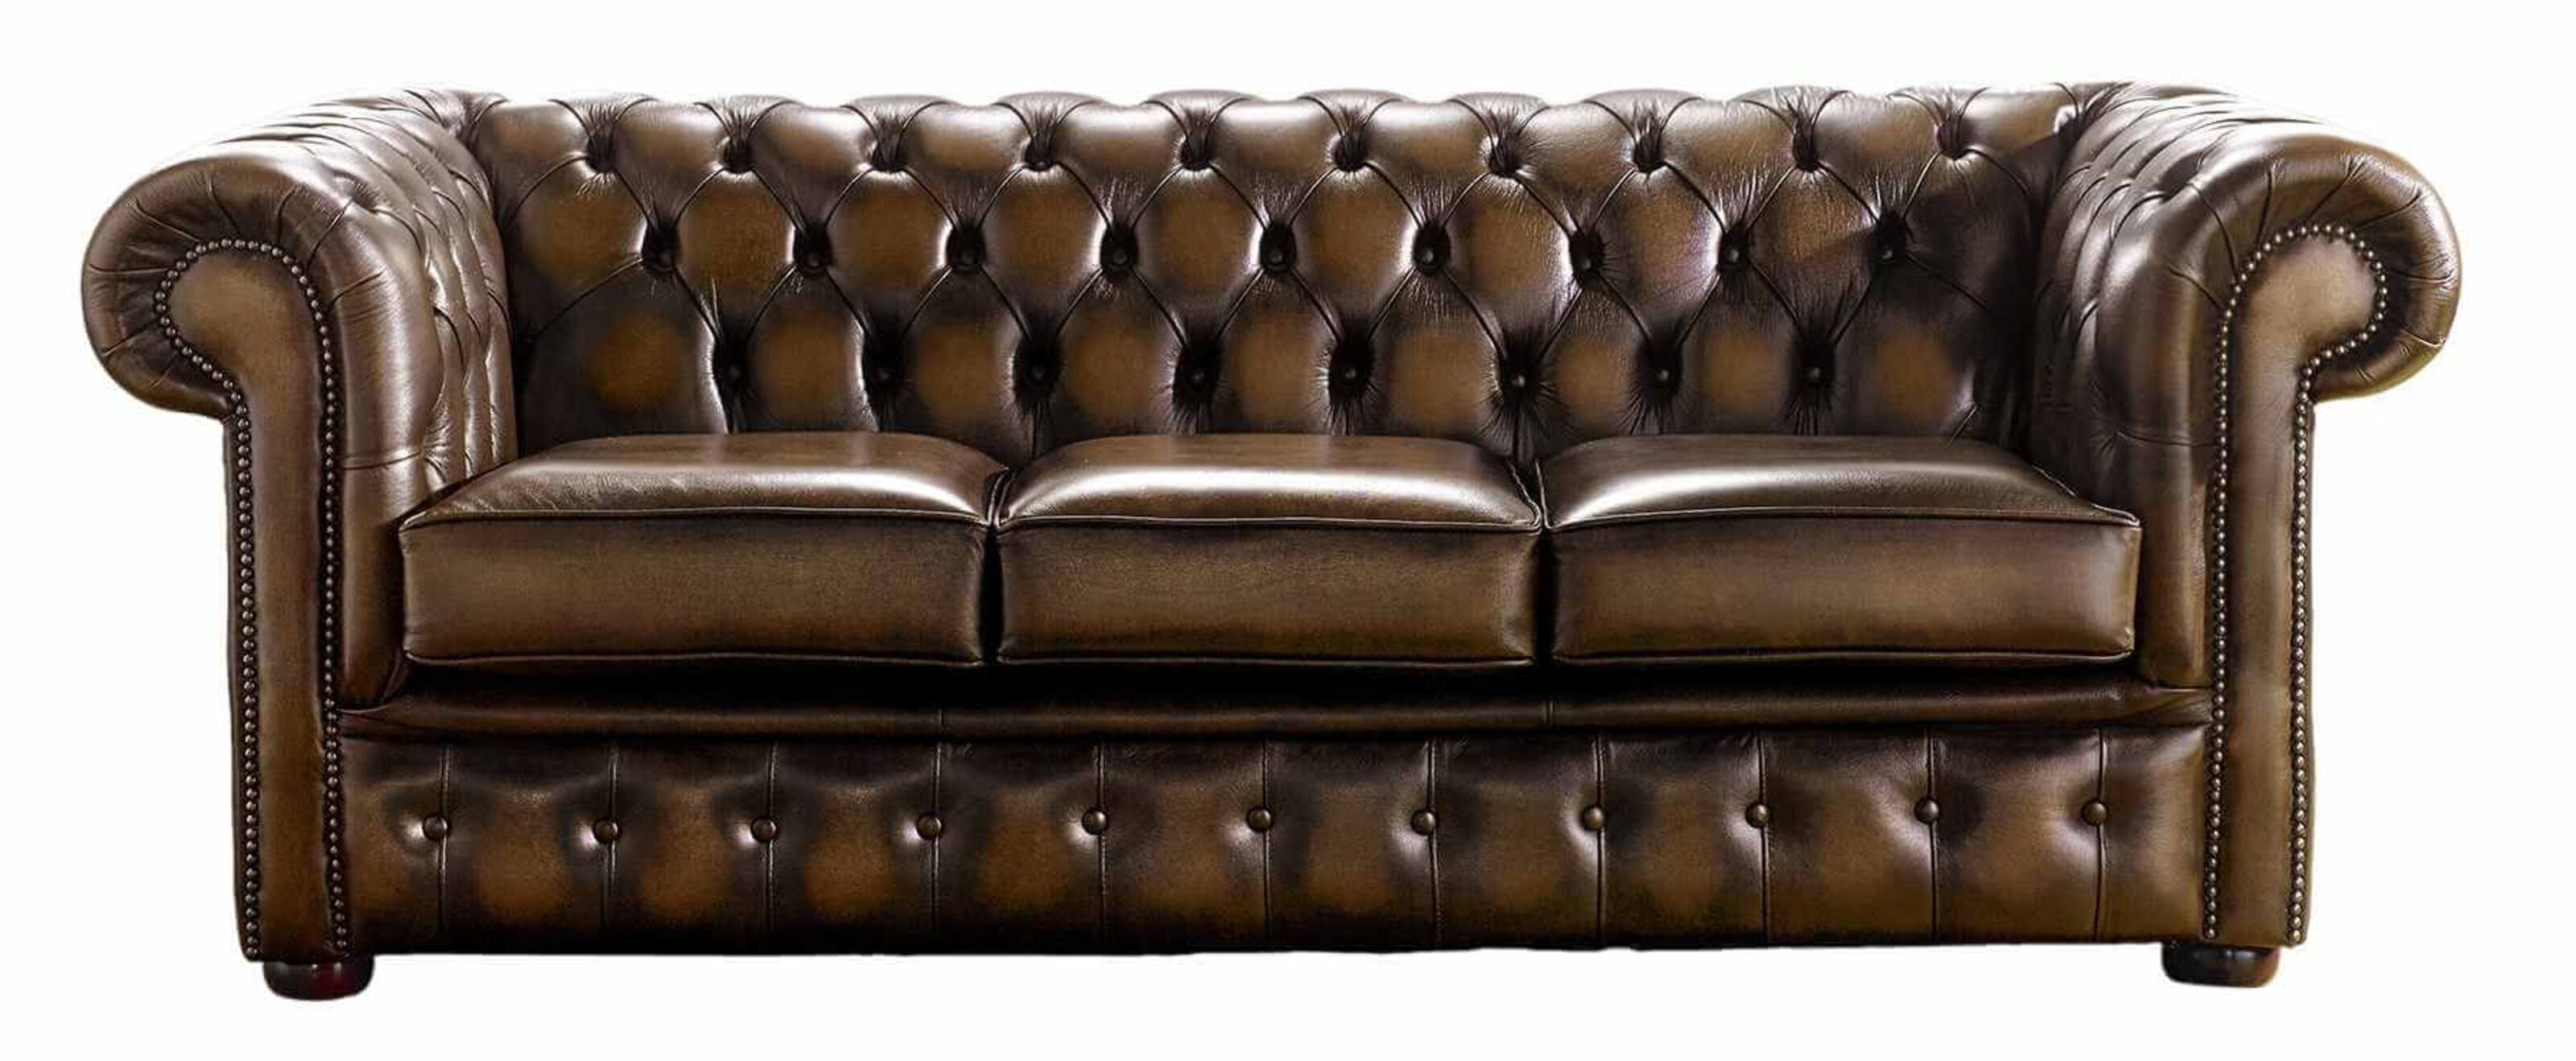 Elevate Your Movie Nights with DesignerSofas4u's Bean Bag Sofas  %Post Title